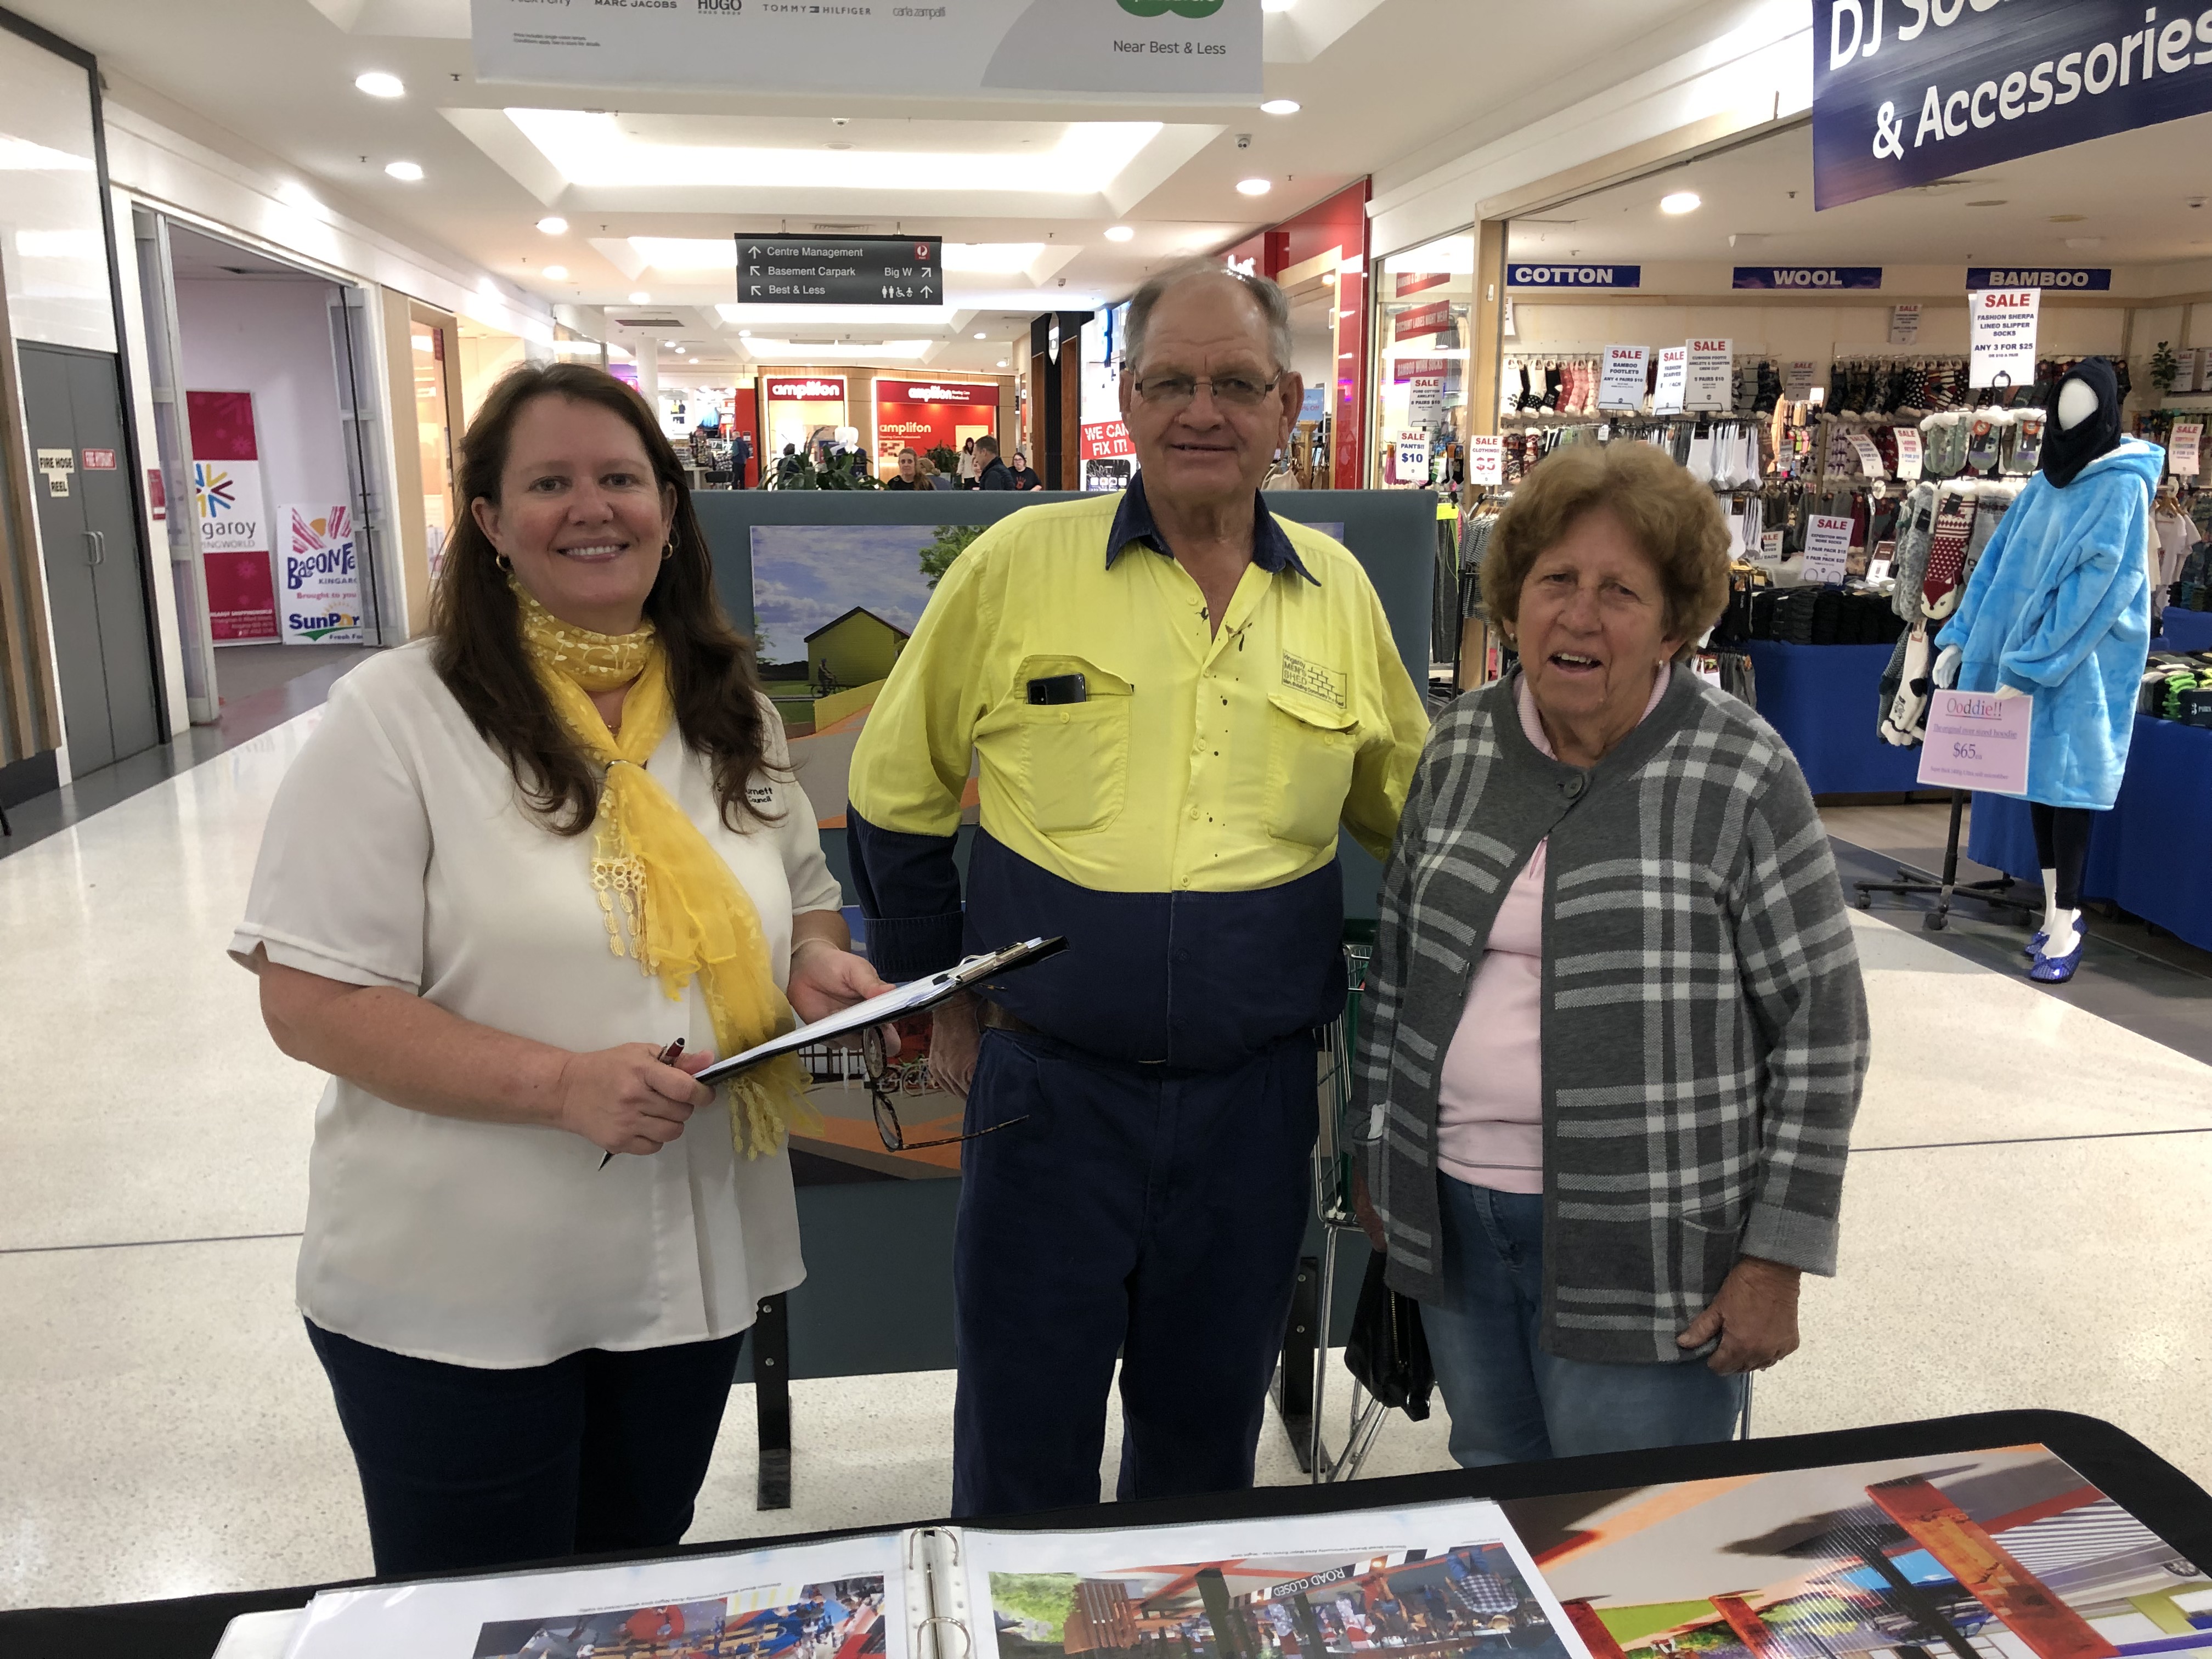 Image: Councillor Danita Potter chatting with local residents at the Kingaroy Shoppingworld community consultation